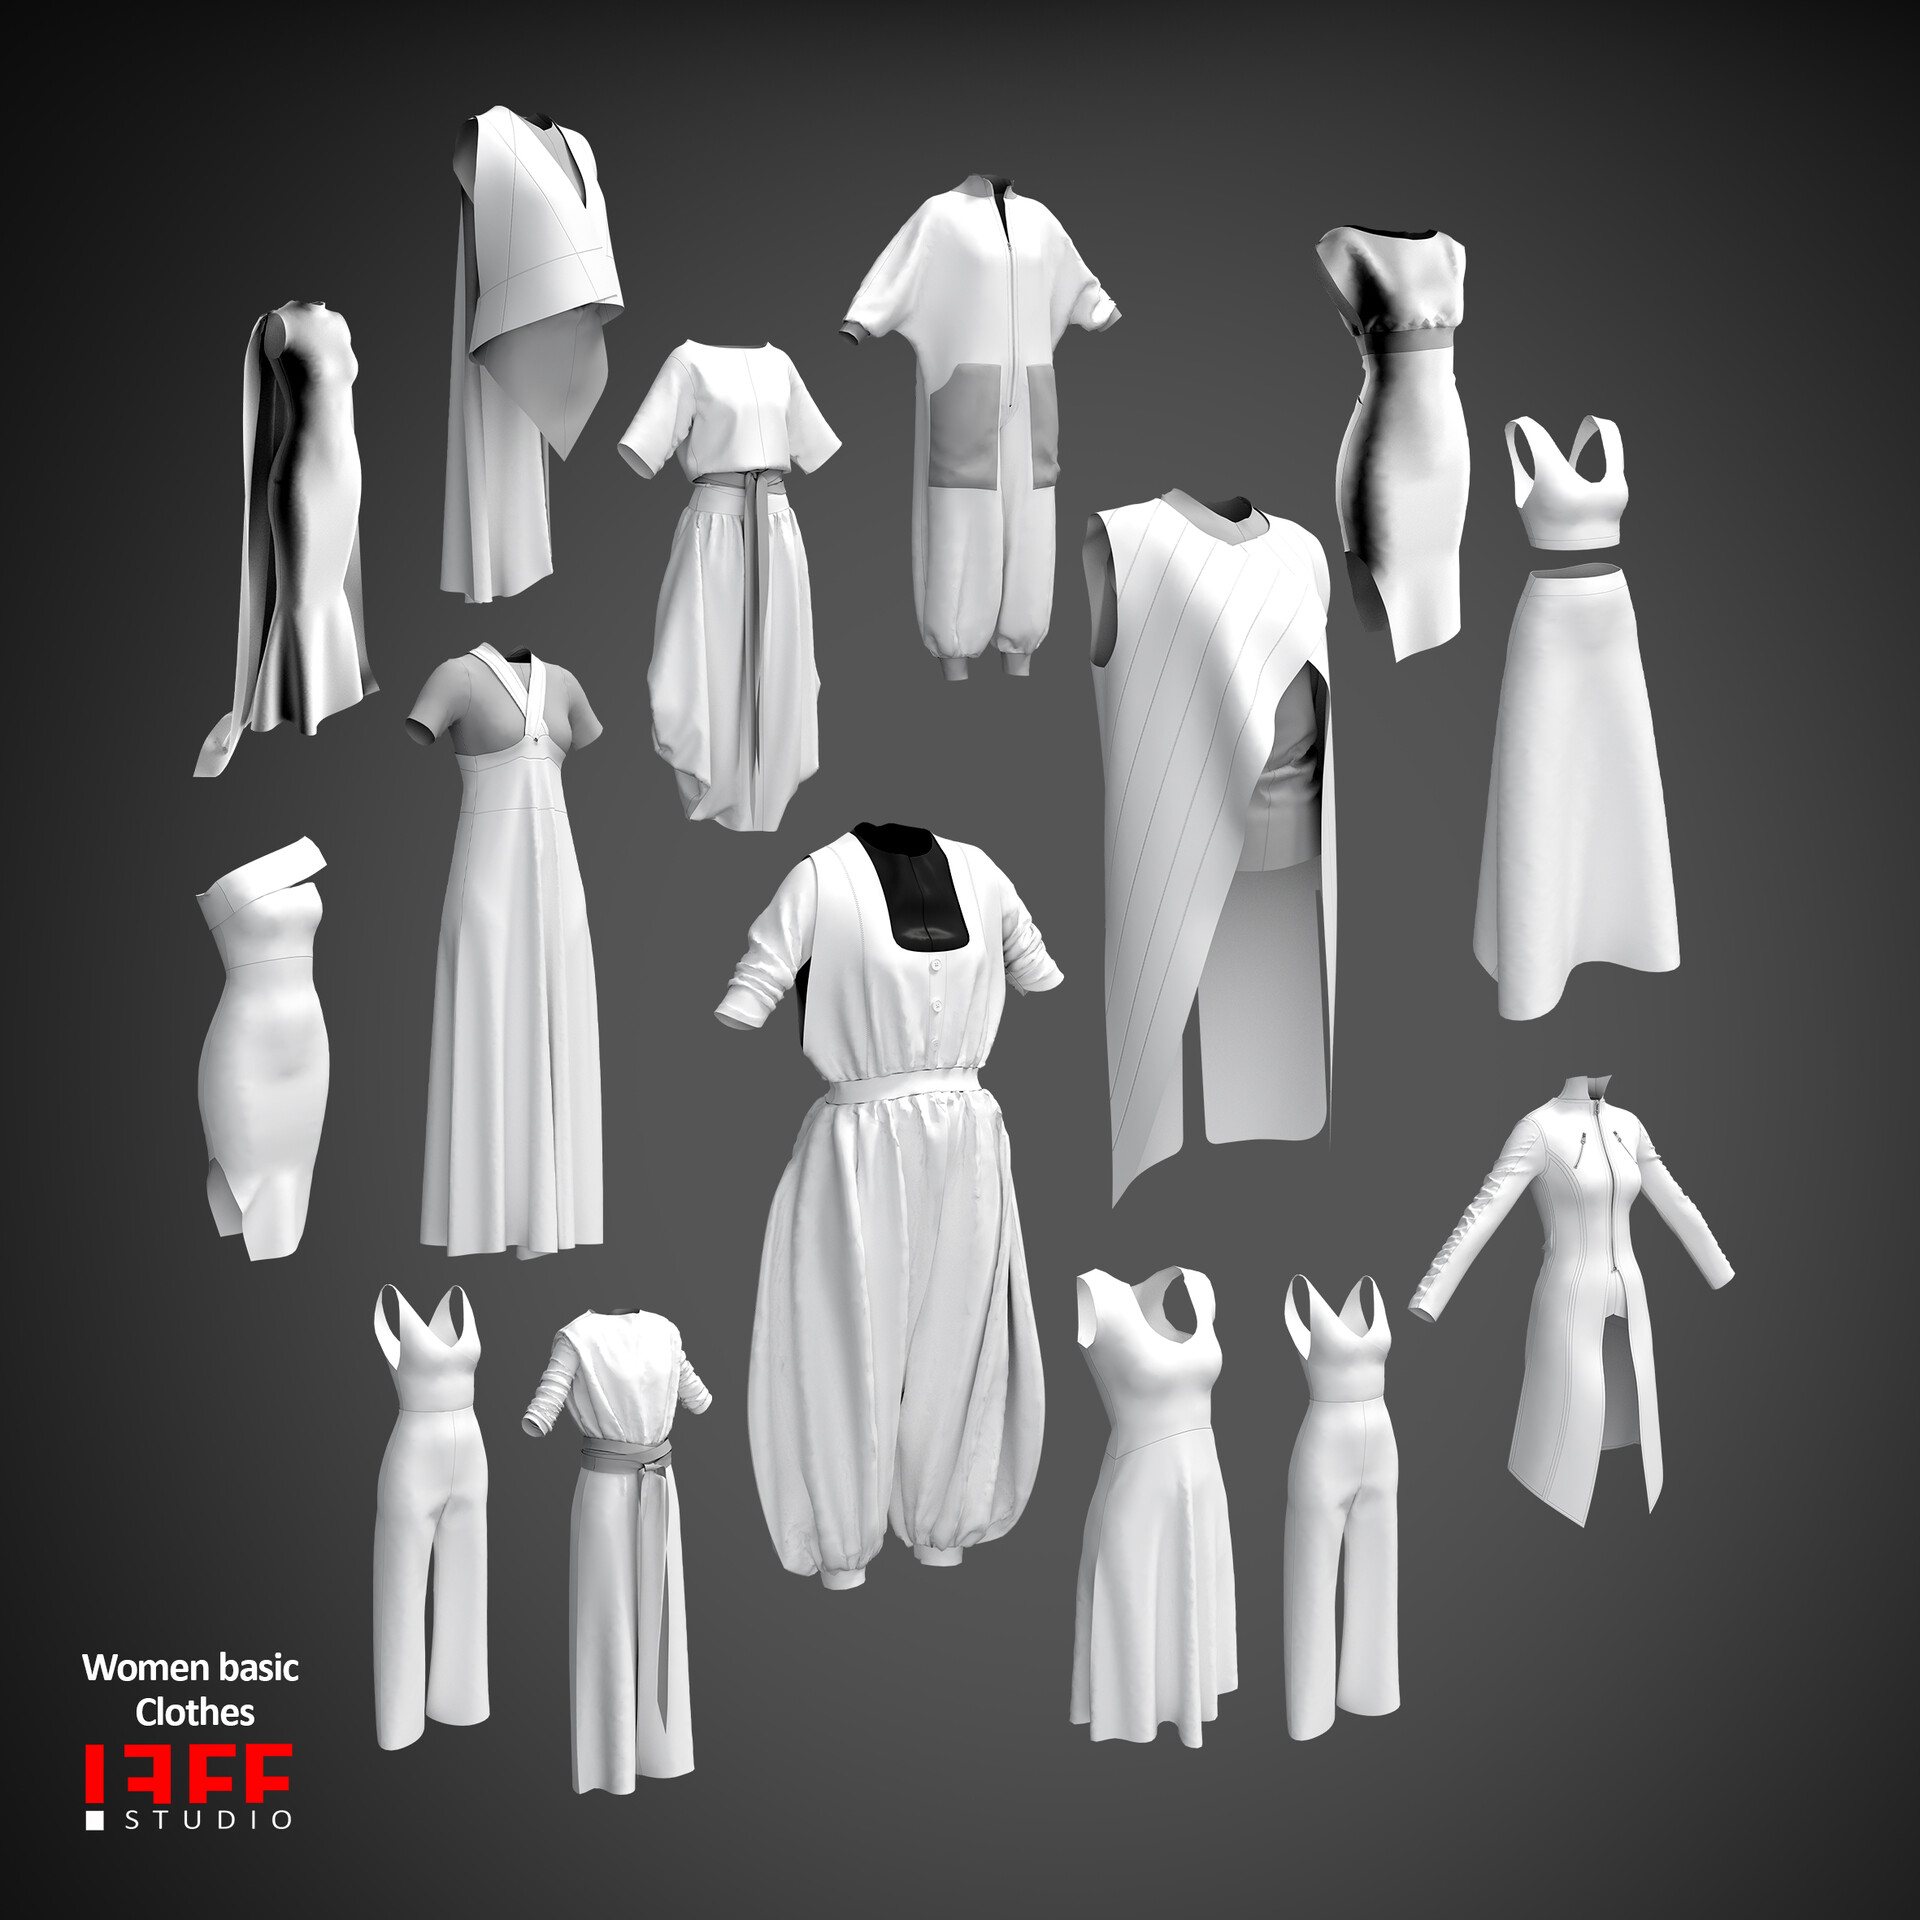 ArtStation - WOMEN BASIC CLOTHES AND ACCESSORIES